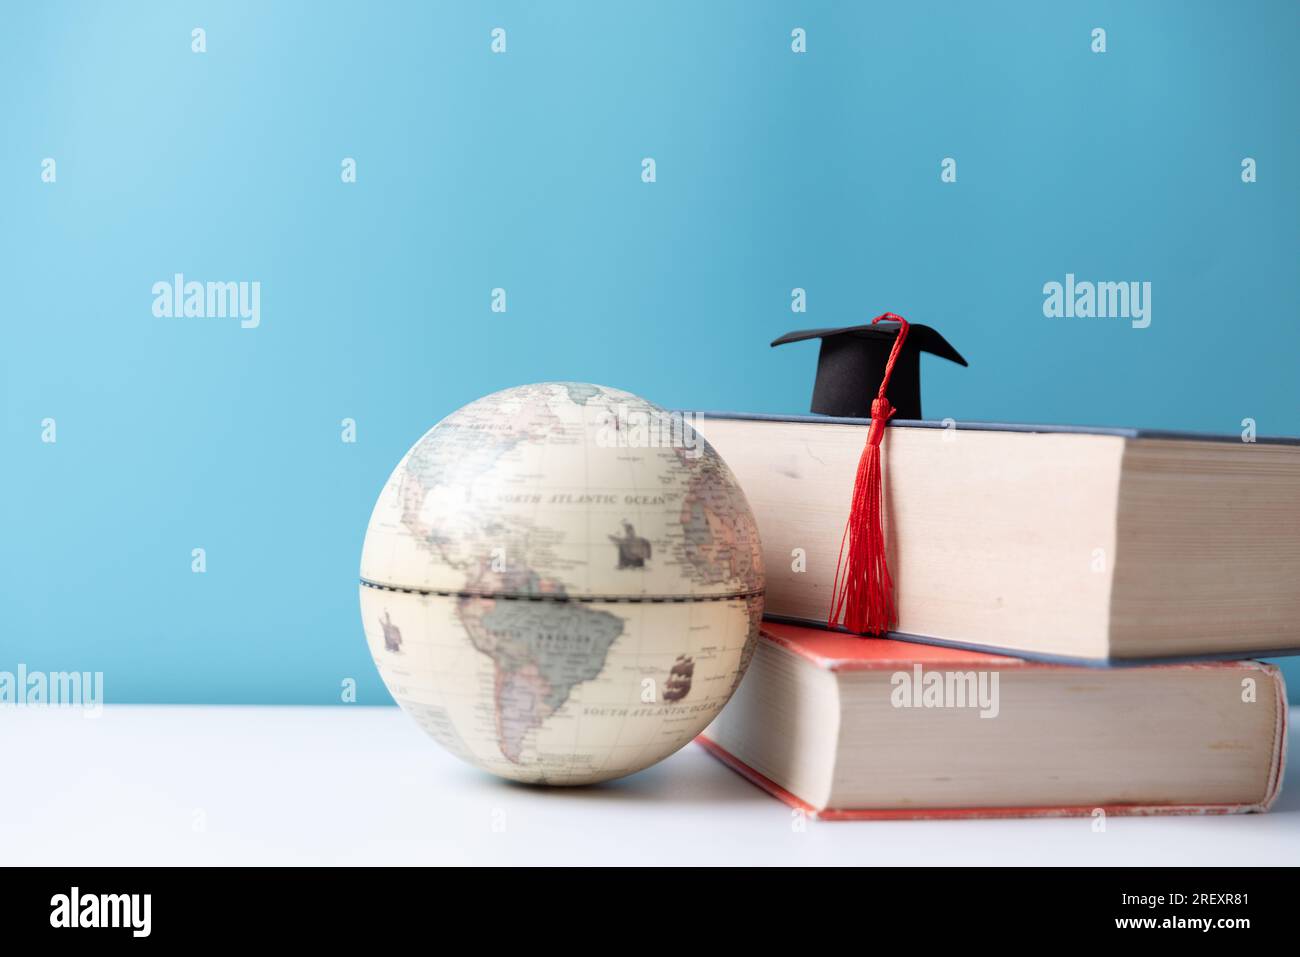 Graduation cap with Earth globe. Concept of global business study, abroad educational, Back to School, Study abroad business in universities. Elements Stock Photo